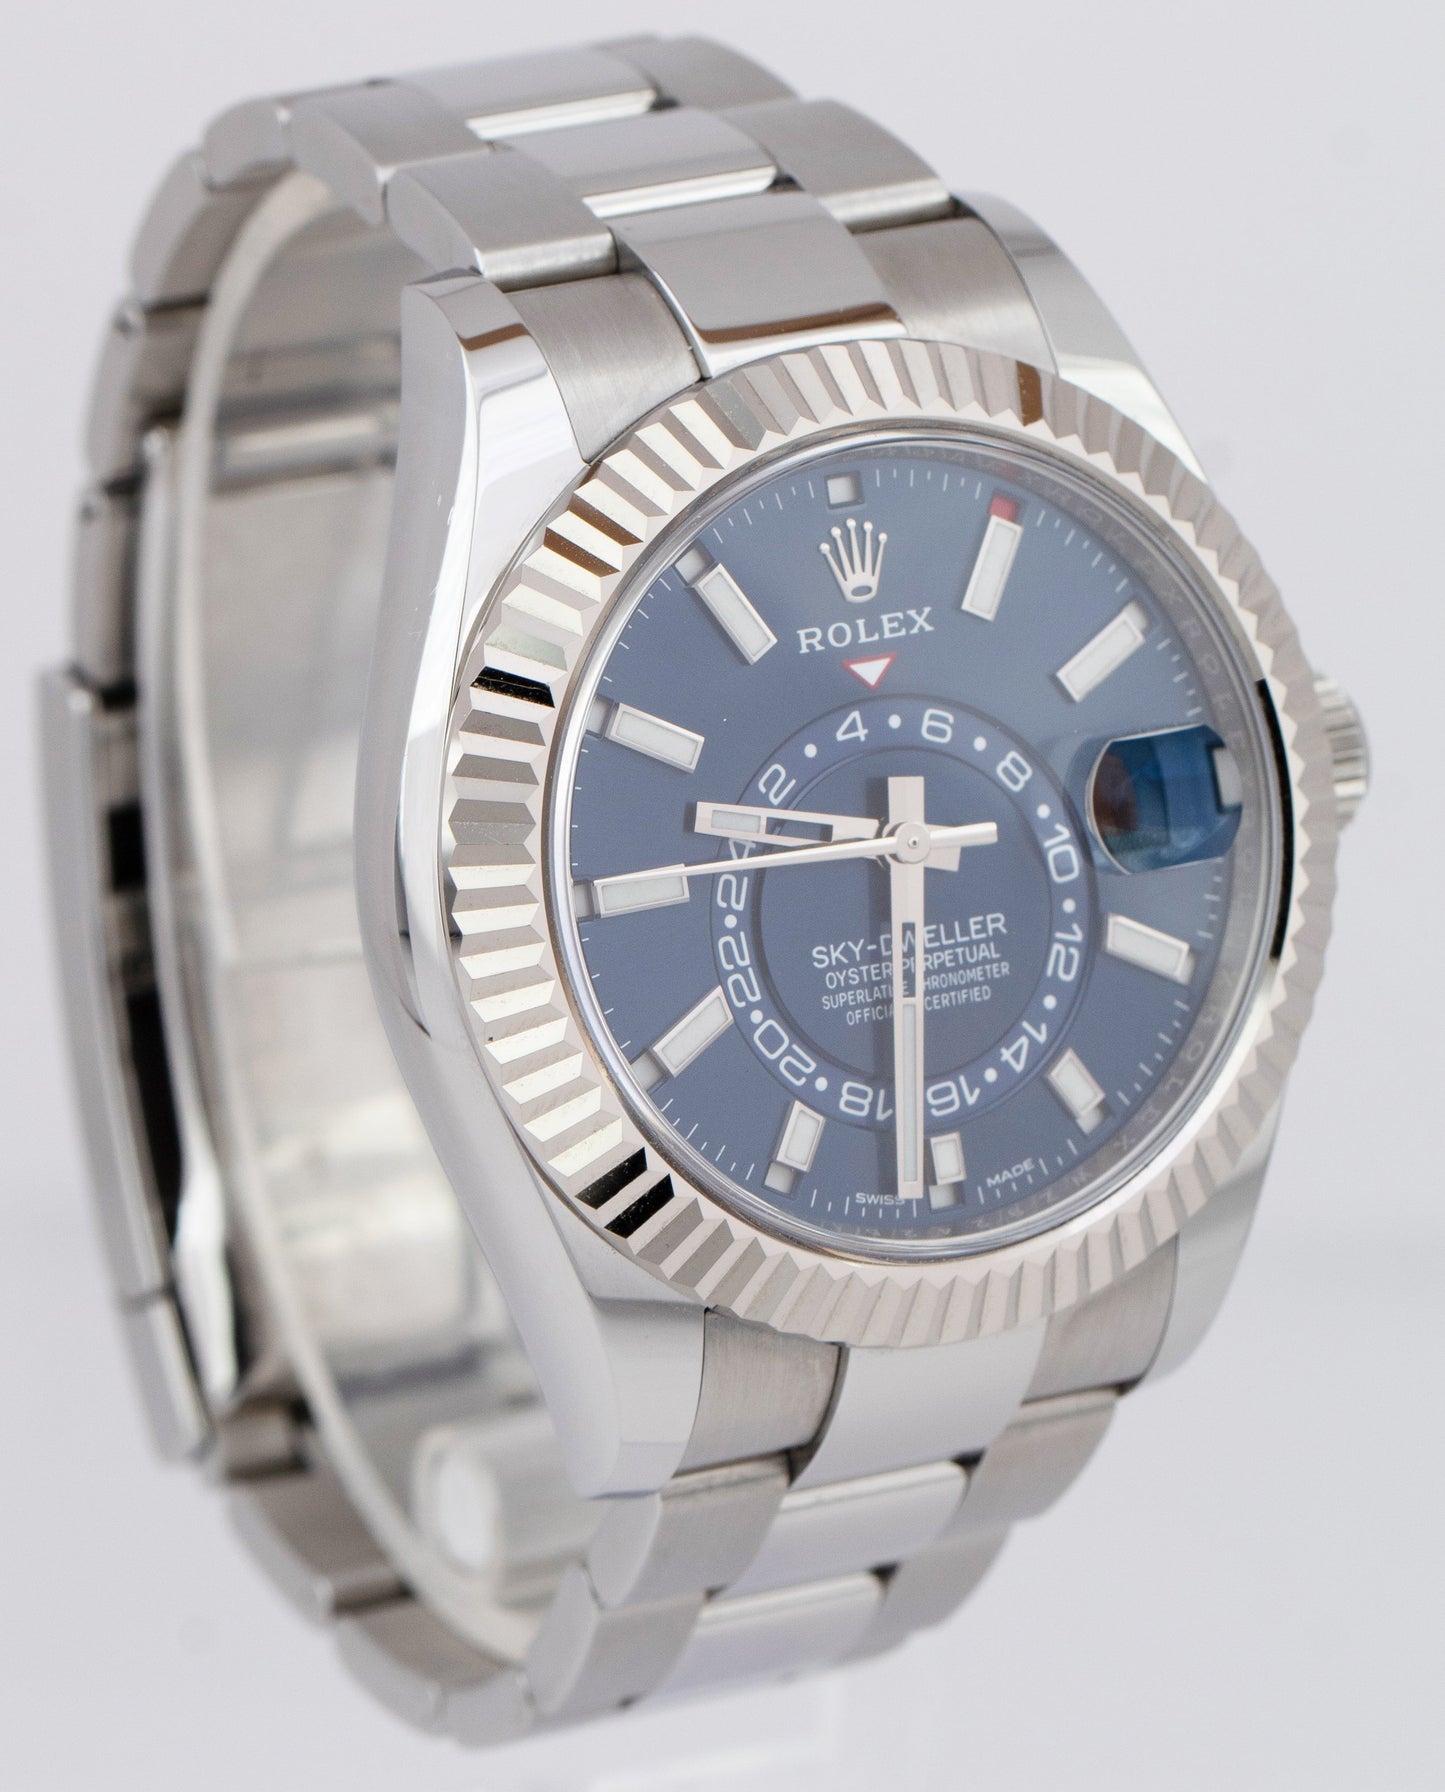 Rolex Sky-Dweller BLUE Stainless Steel White Gold 326934 42mm Oyster Watch BOX